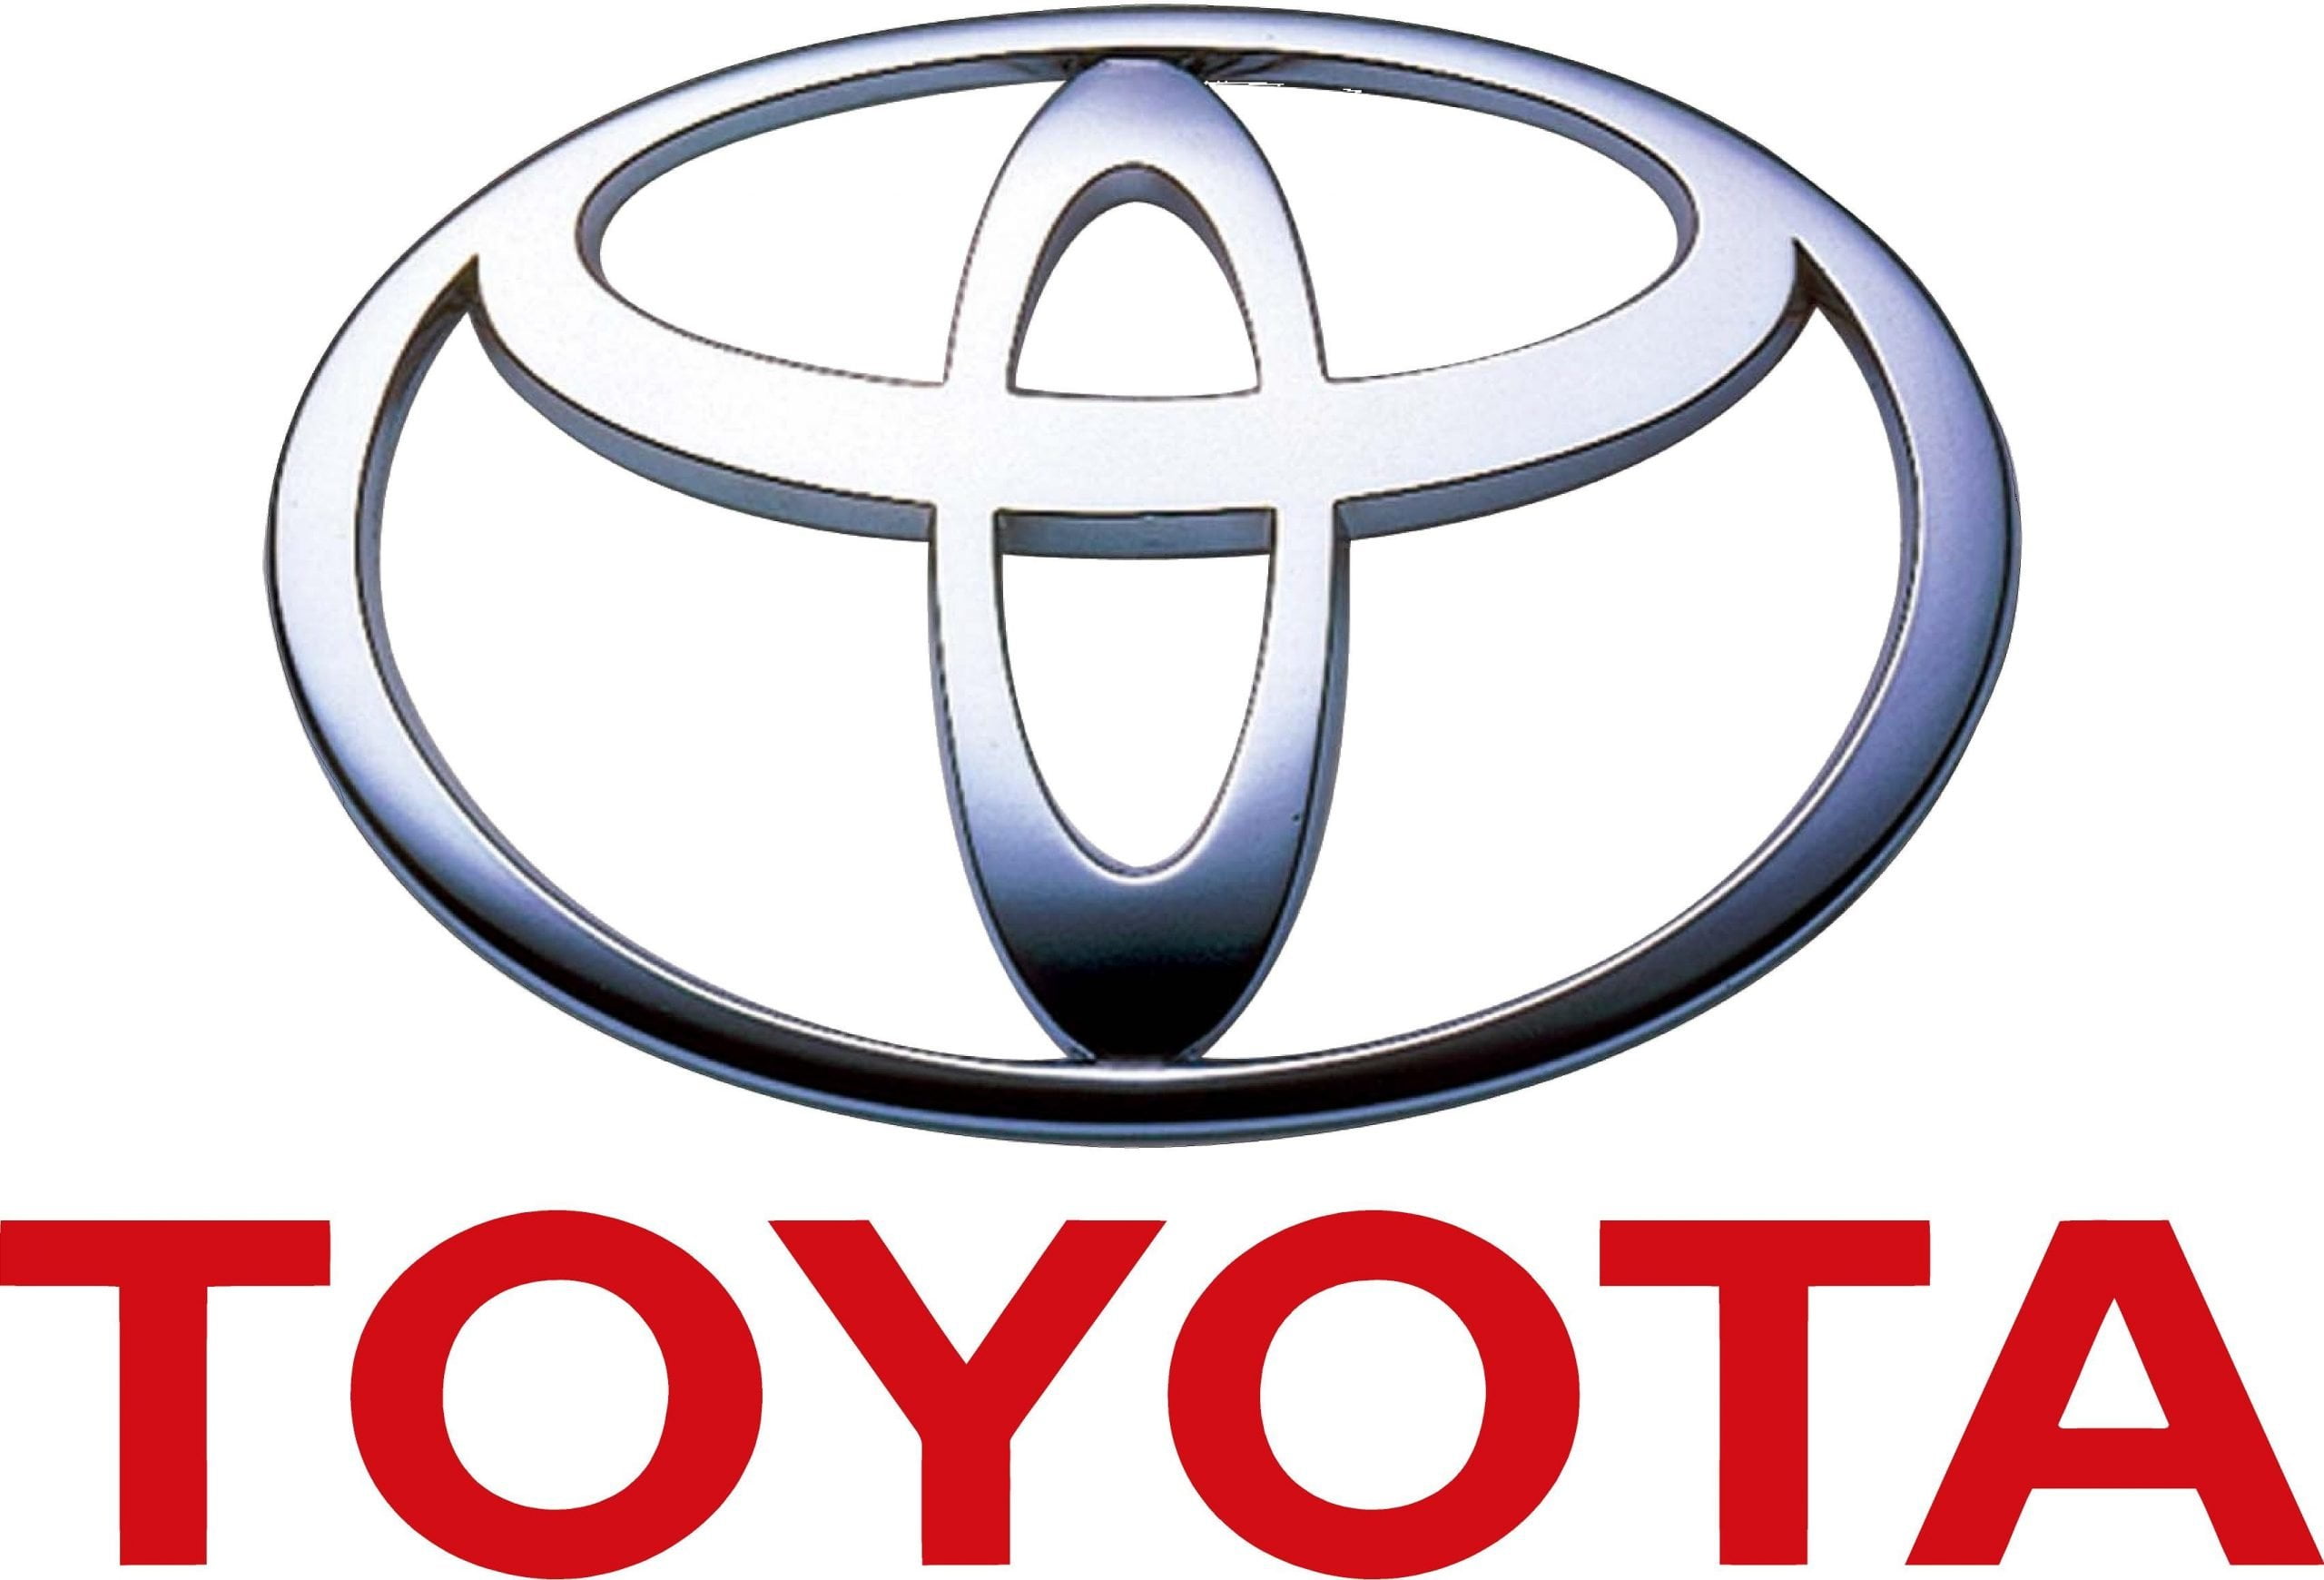 toyota-logo-png | Focus2Move